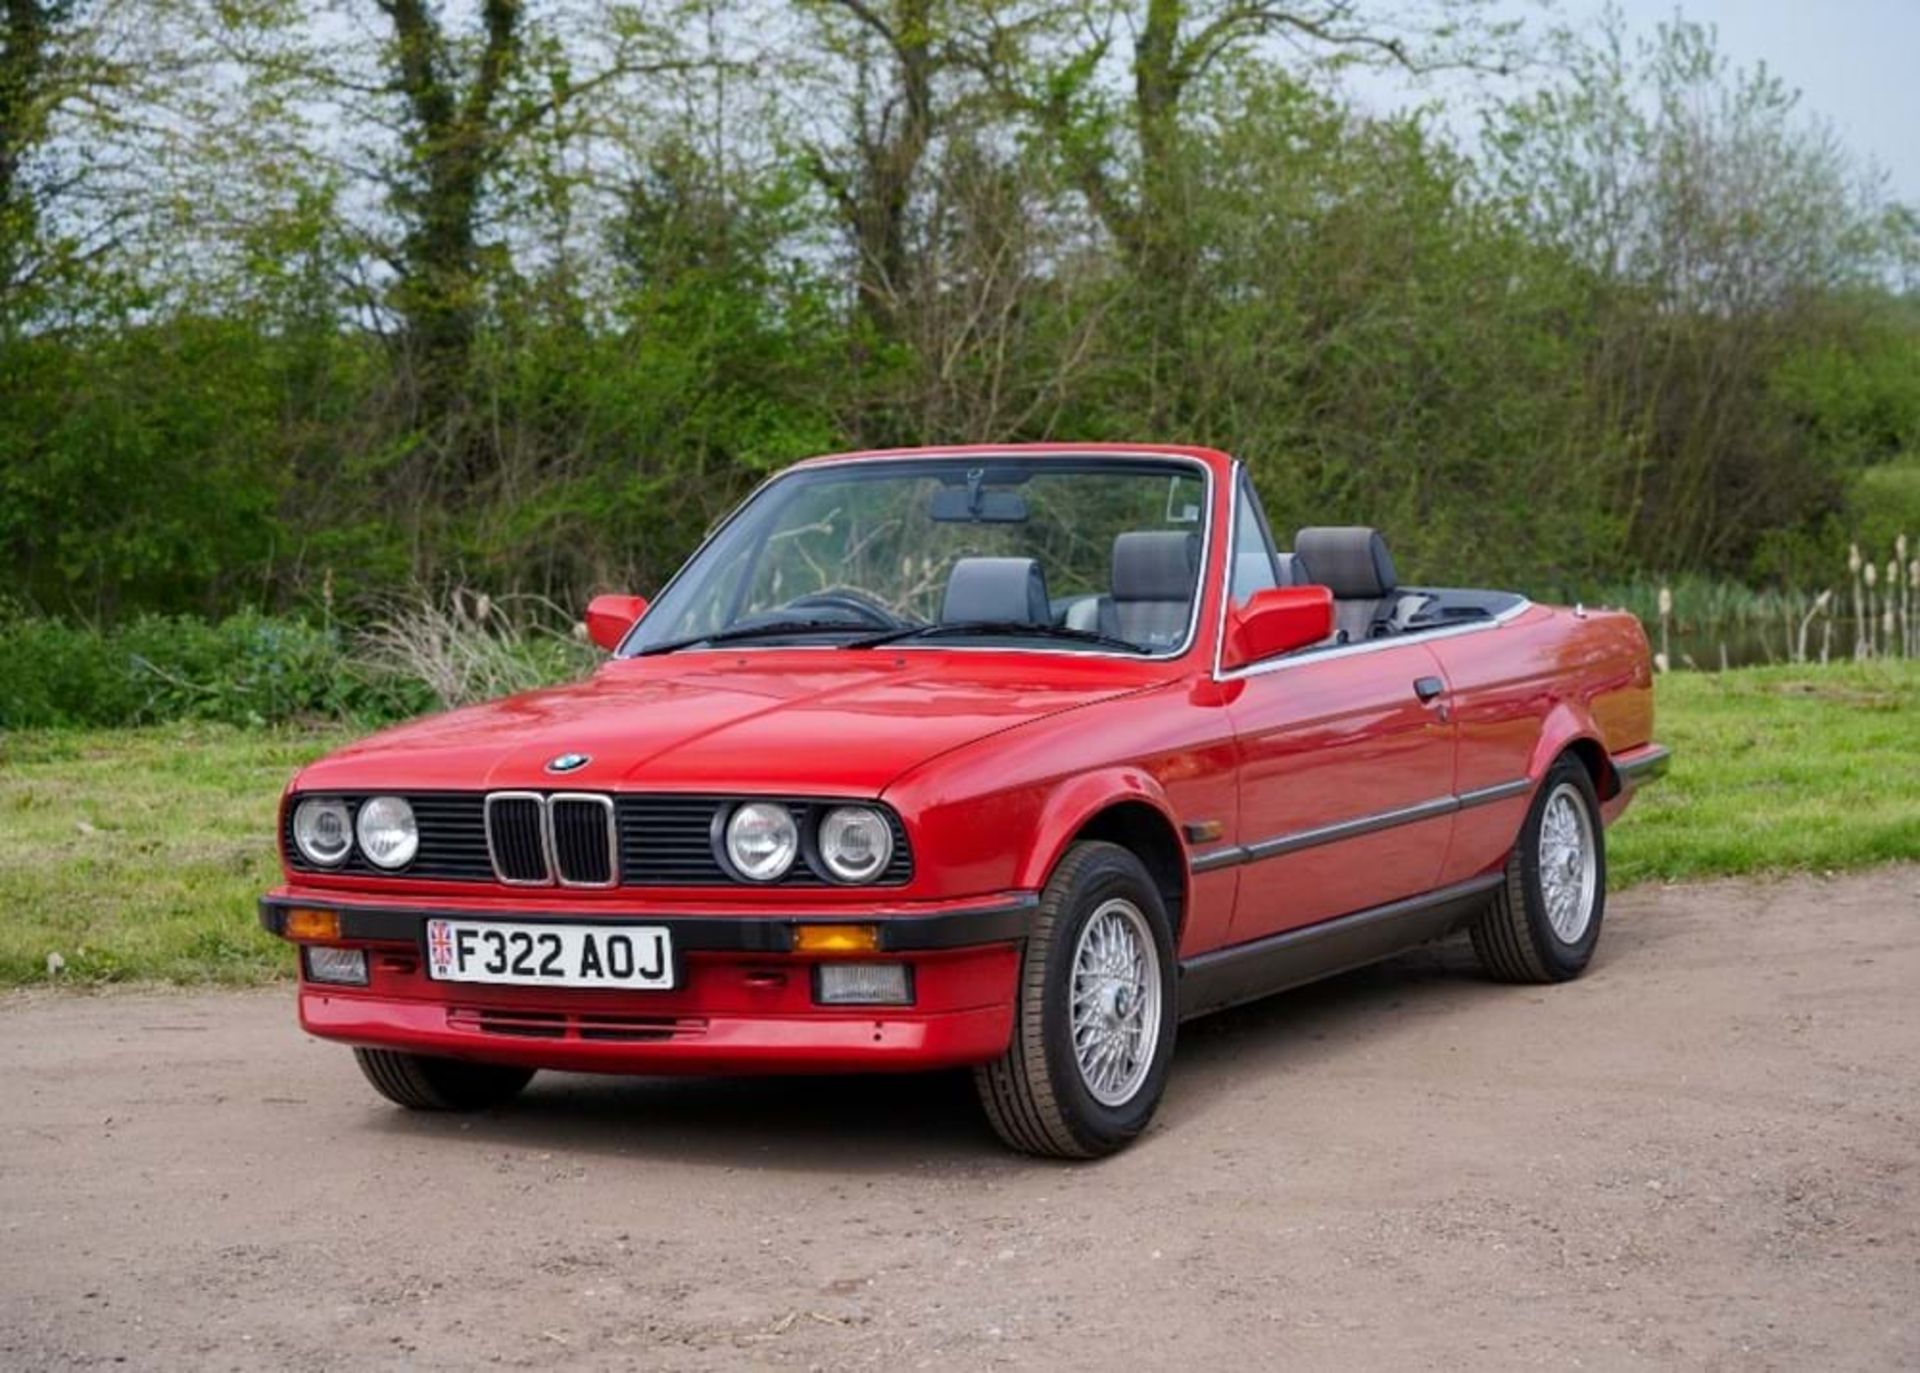 1989 BMW 325i Convertible - Image 2 of 10